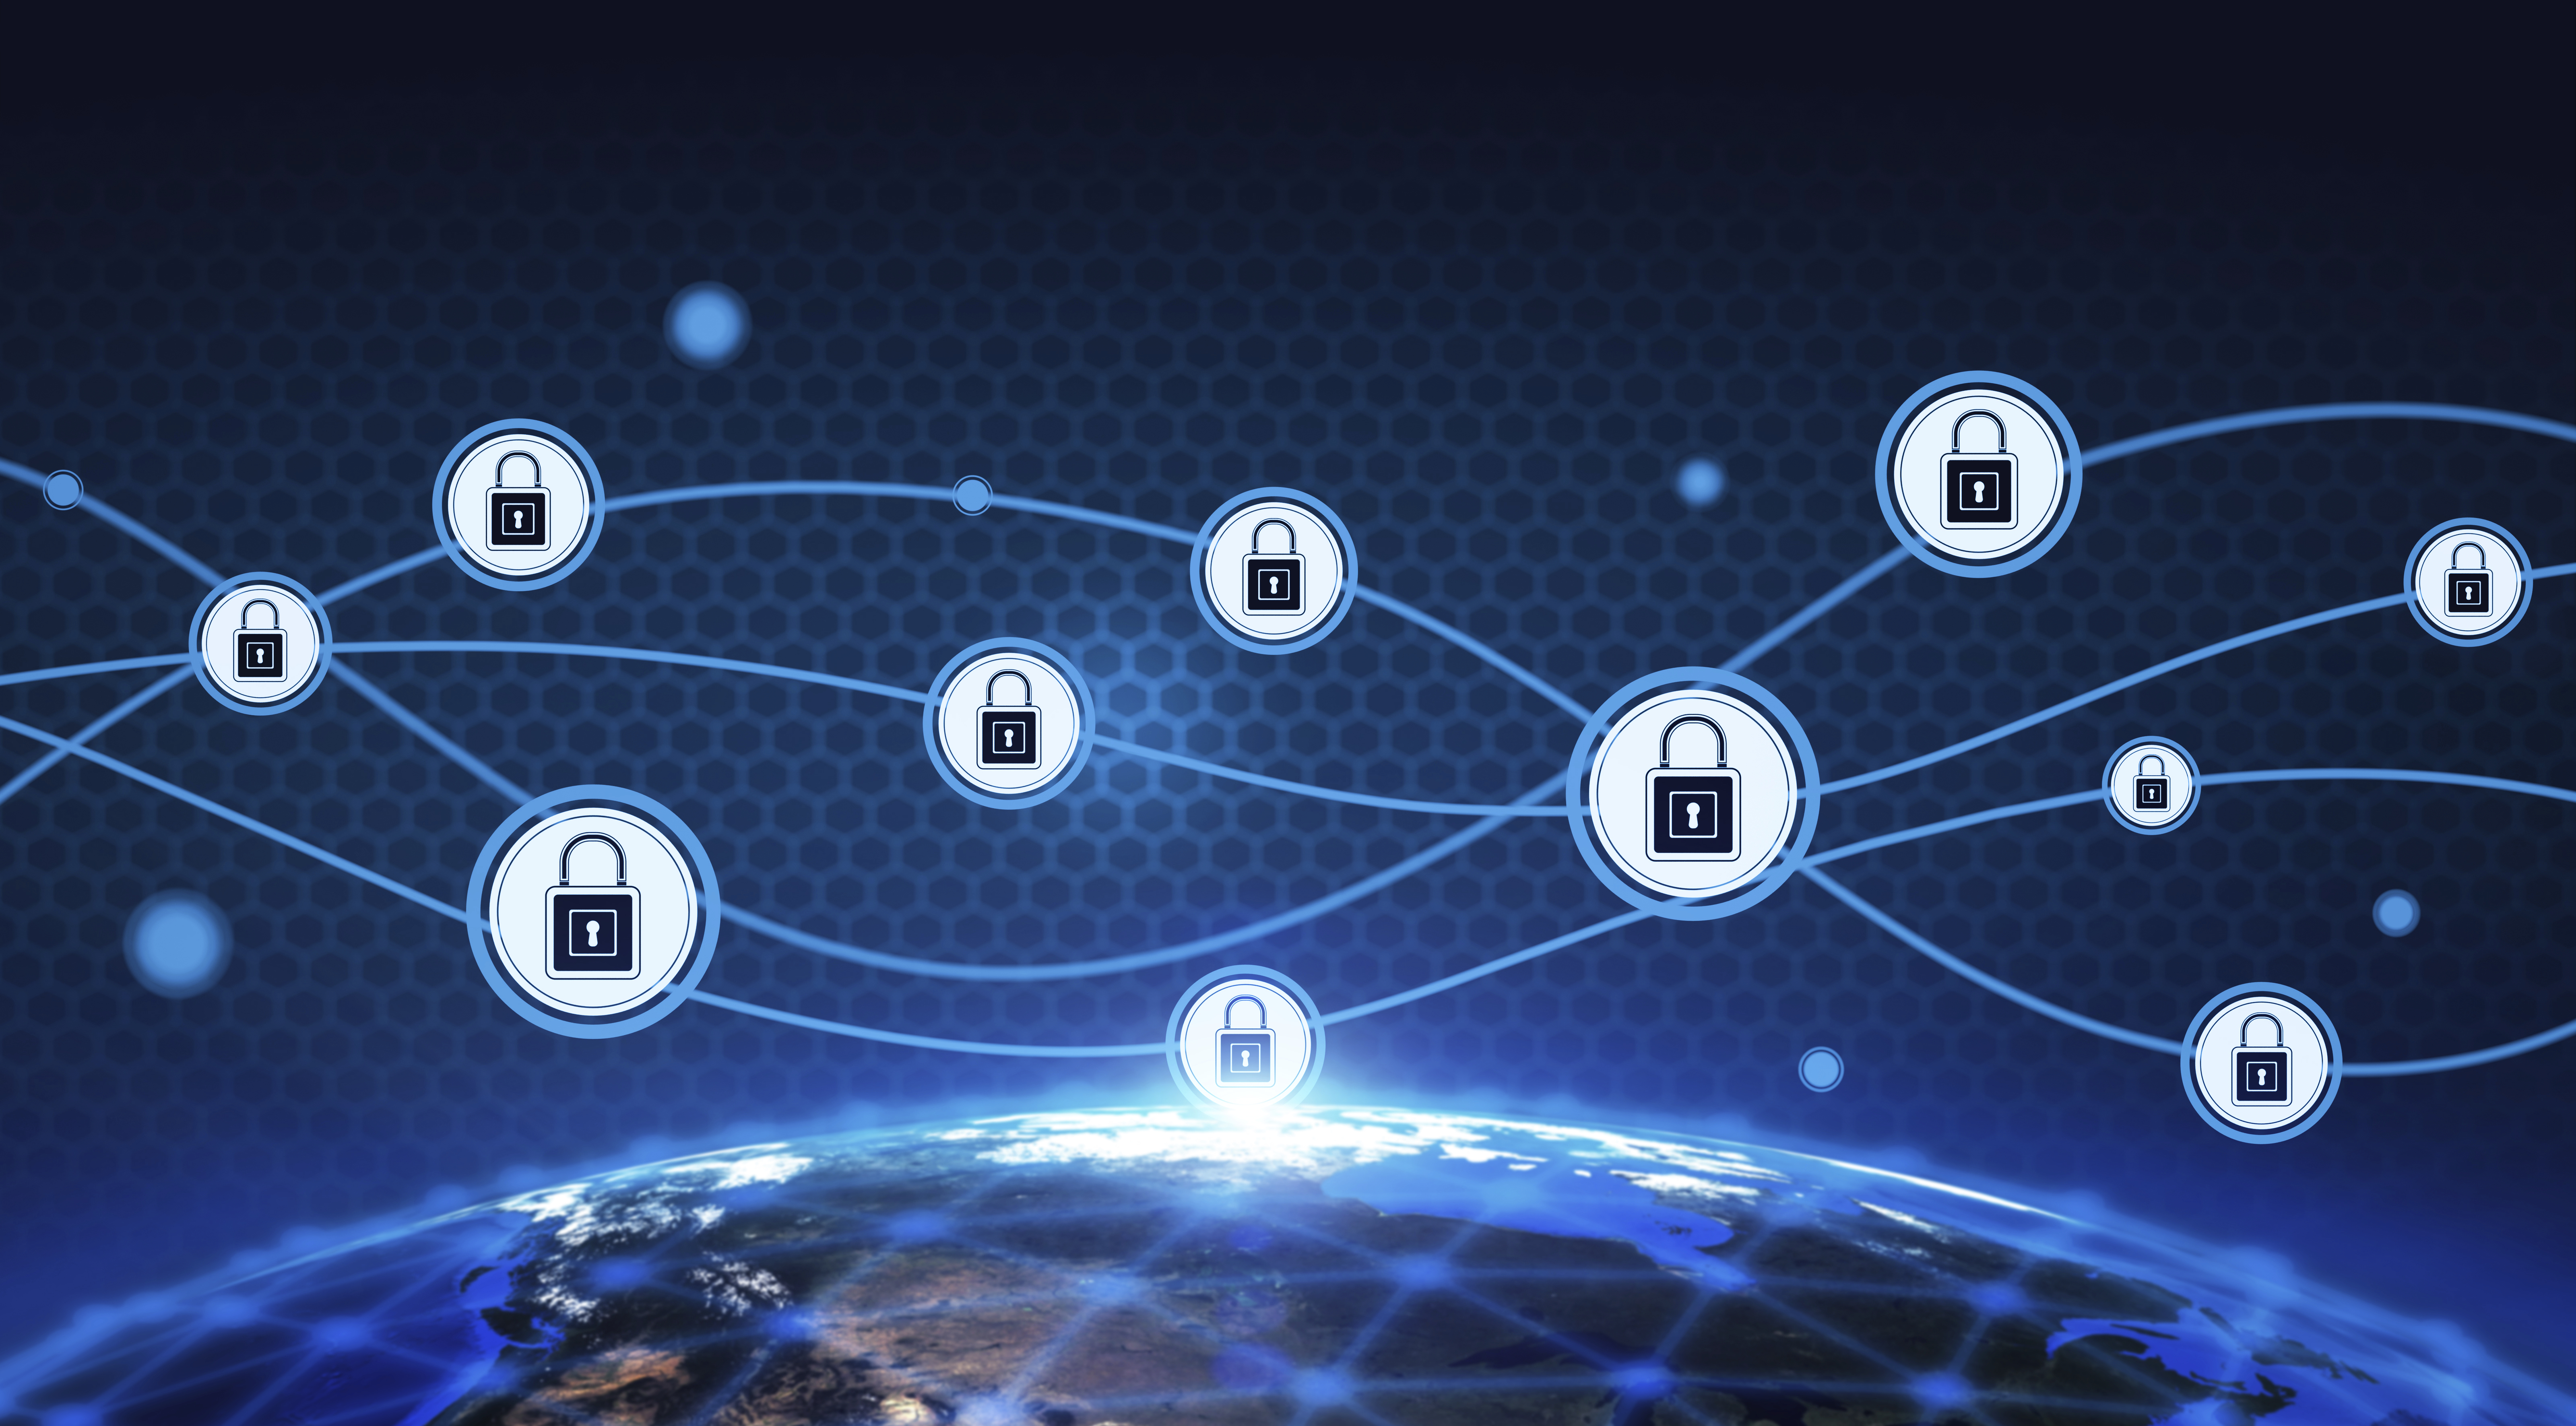 Internet of Things security concerns, questions and solutions